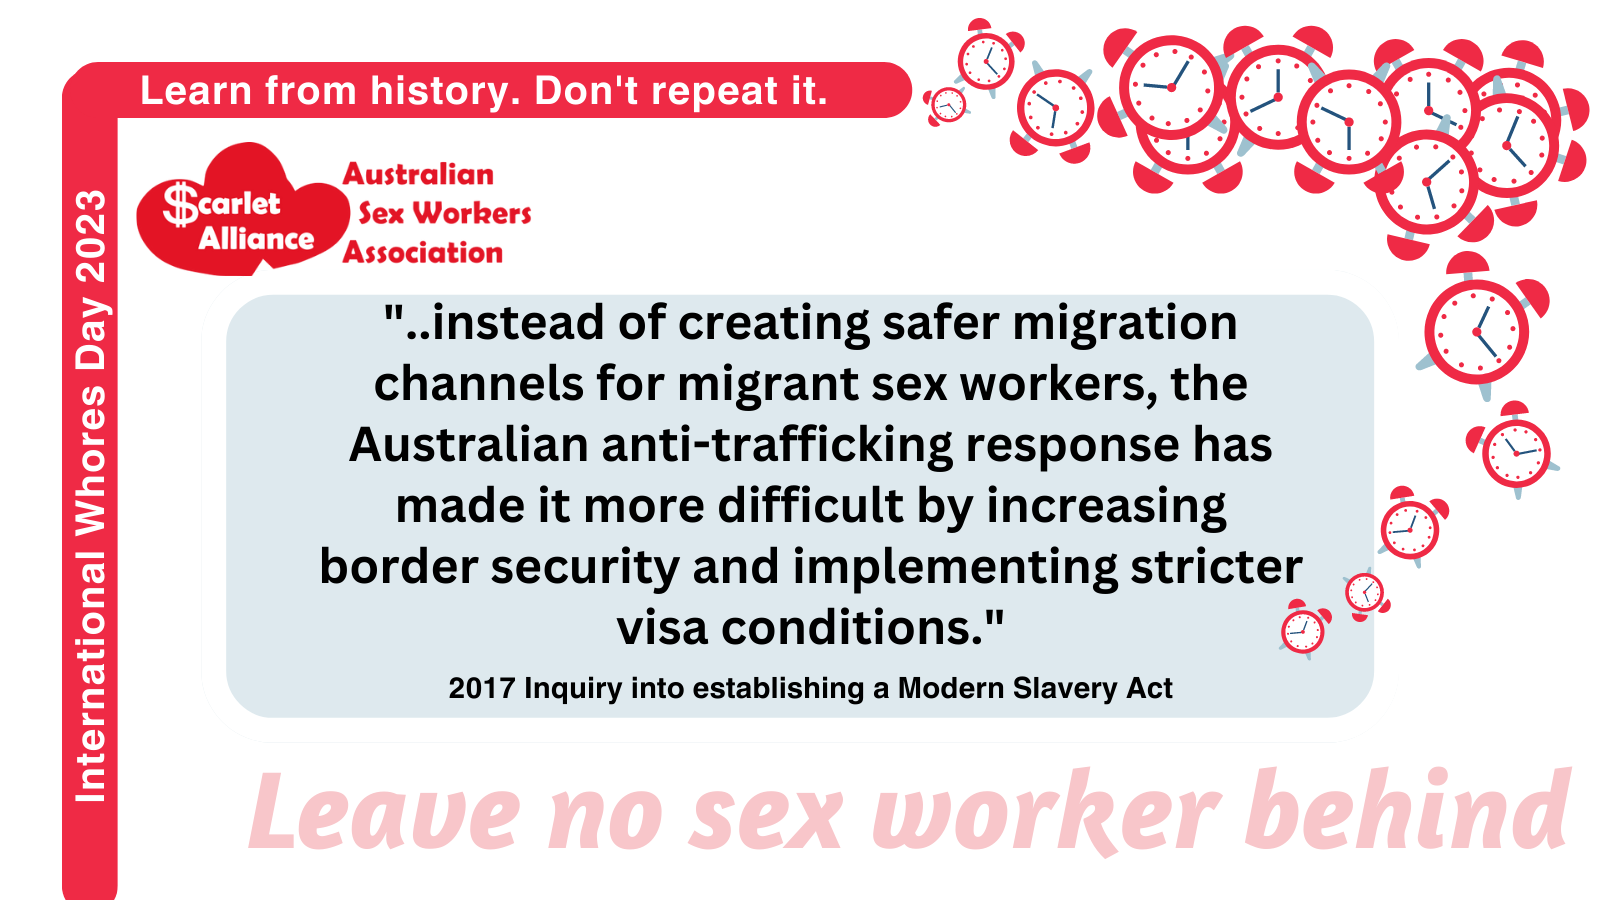 “Migrant sex workers need increased access to safe migration pathways. However, instead of creating safer migration channels for migrant sex workers, the Australian anti-trafficking response has made it more difficult by increasing border security and implementing stricter visa conditions. Making migration more difficult for migrant sex workers increases vulnerabilities to trafficking. Immigration restrictions impede regular migration for many seeking a better life or working conditions. The Palmero Protocol to Prevent, Suppress and Punish Trafficking in Persons Especially Women and Children, supplementing the United Nations Convention Against Transnational Organised Crime (the Protocol) highlights the need to discourage the demand that fosters exploitation that leads to trafficking. Increasing immigration scrutiny and reducing legitimate migration pathways in effect, feeds this demand. Increasing access to legal channels for migrant sex workers to independently enter Australia reduces that potential avenue for exploitation.”